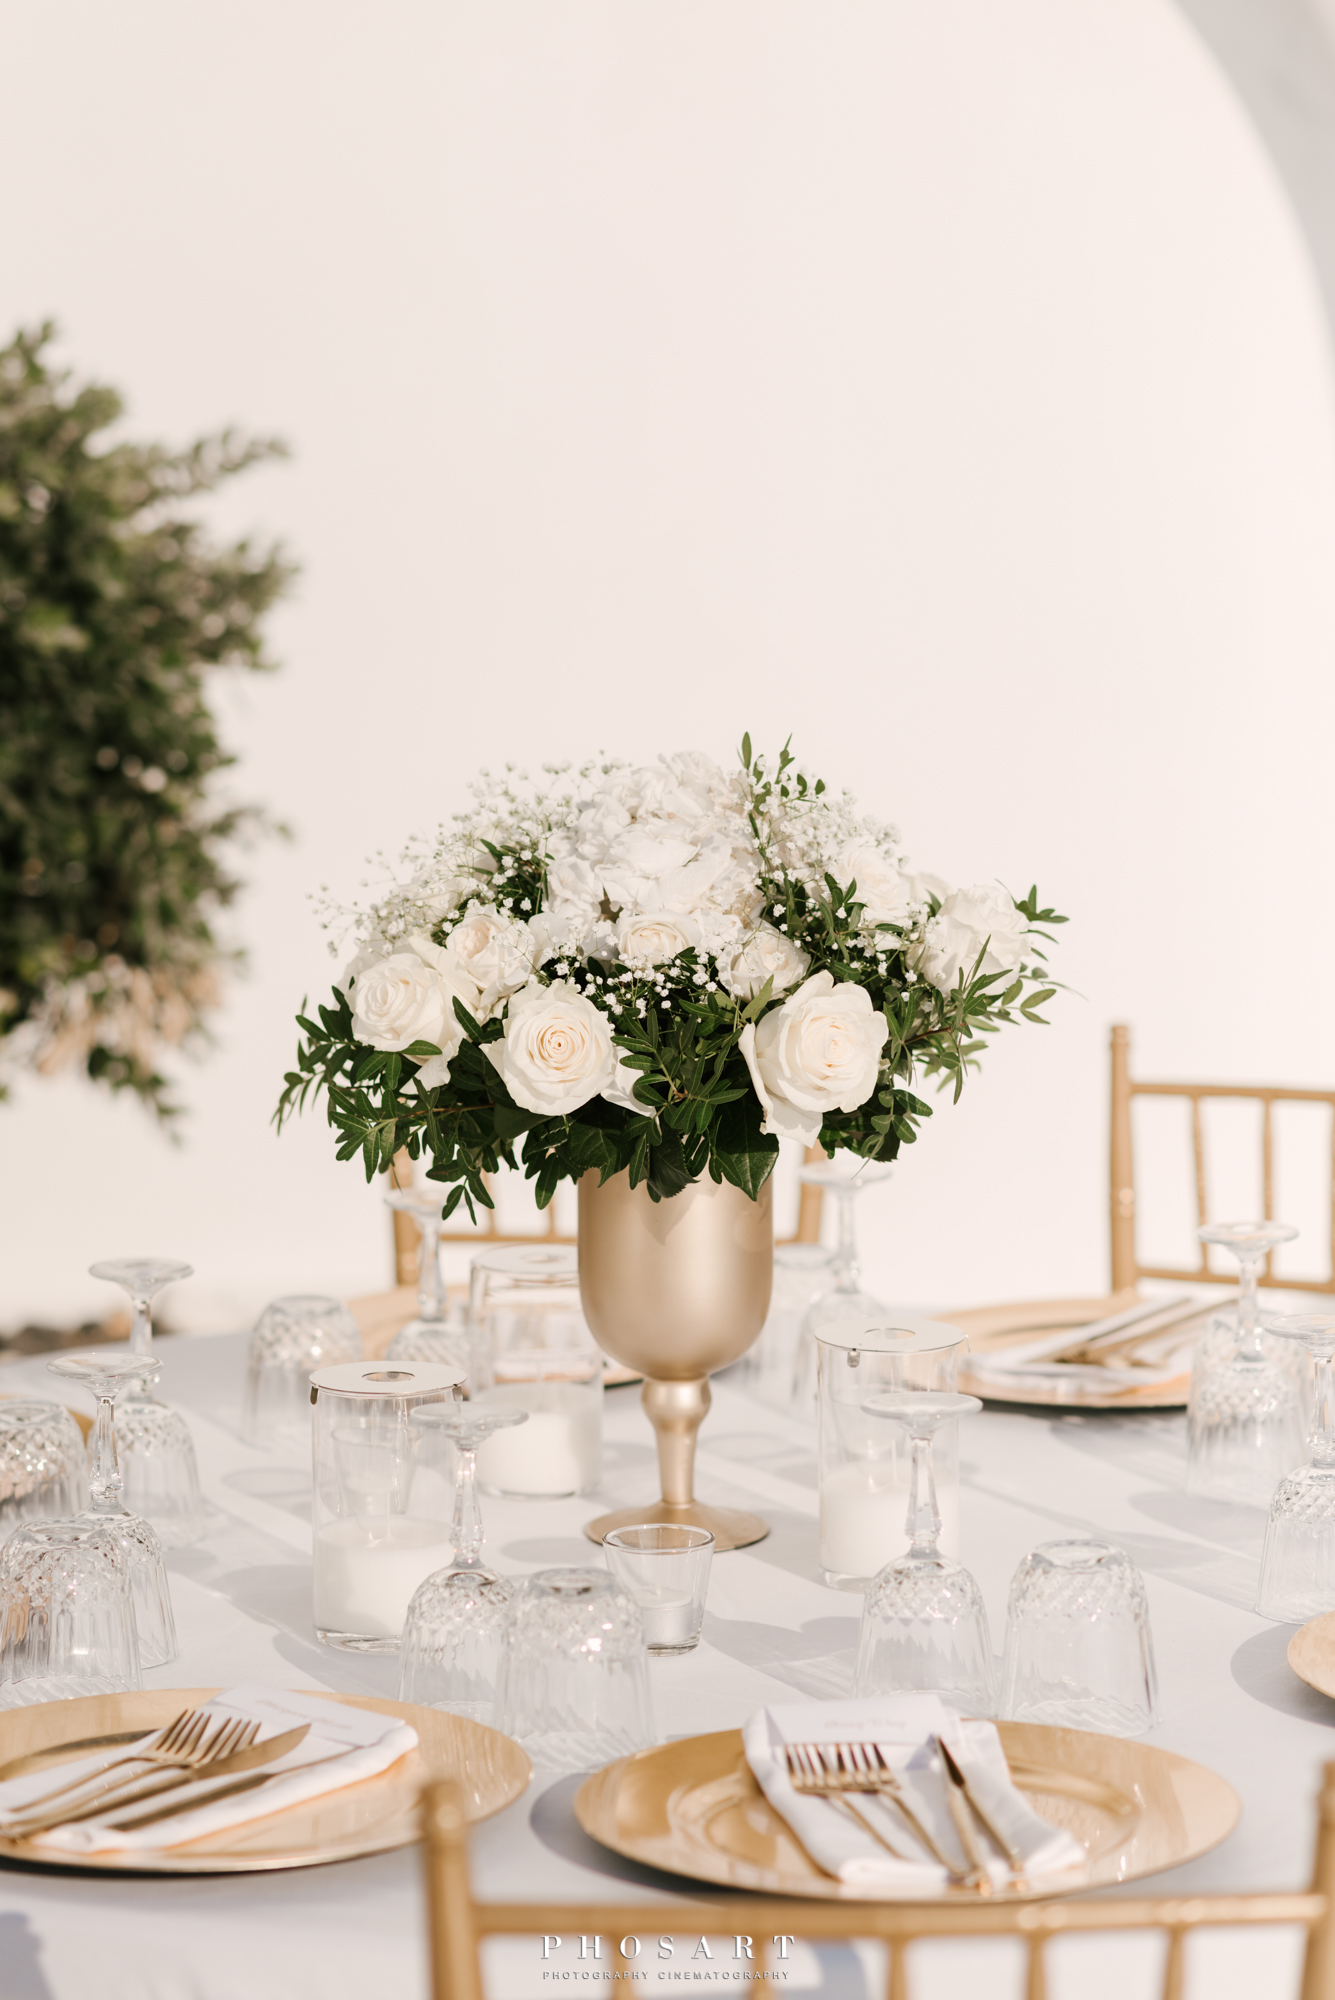 An elegant wedding rotunda decorated with gold plates and a bouquet of white roses